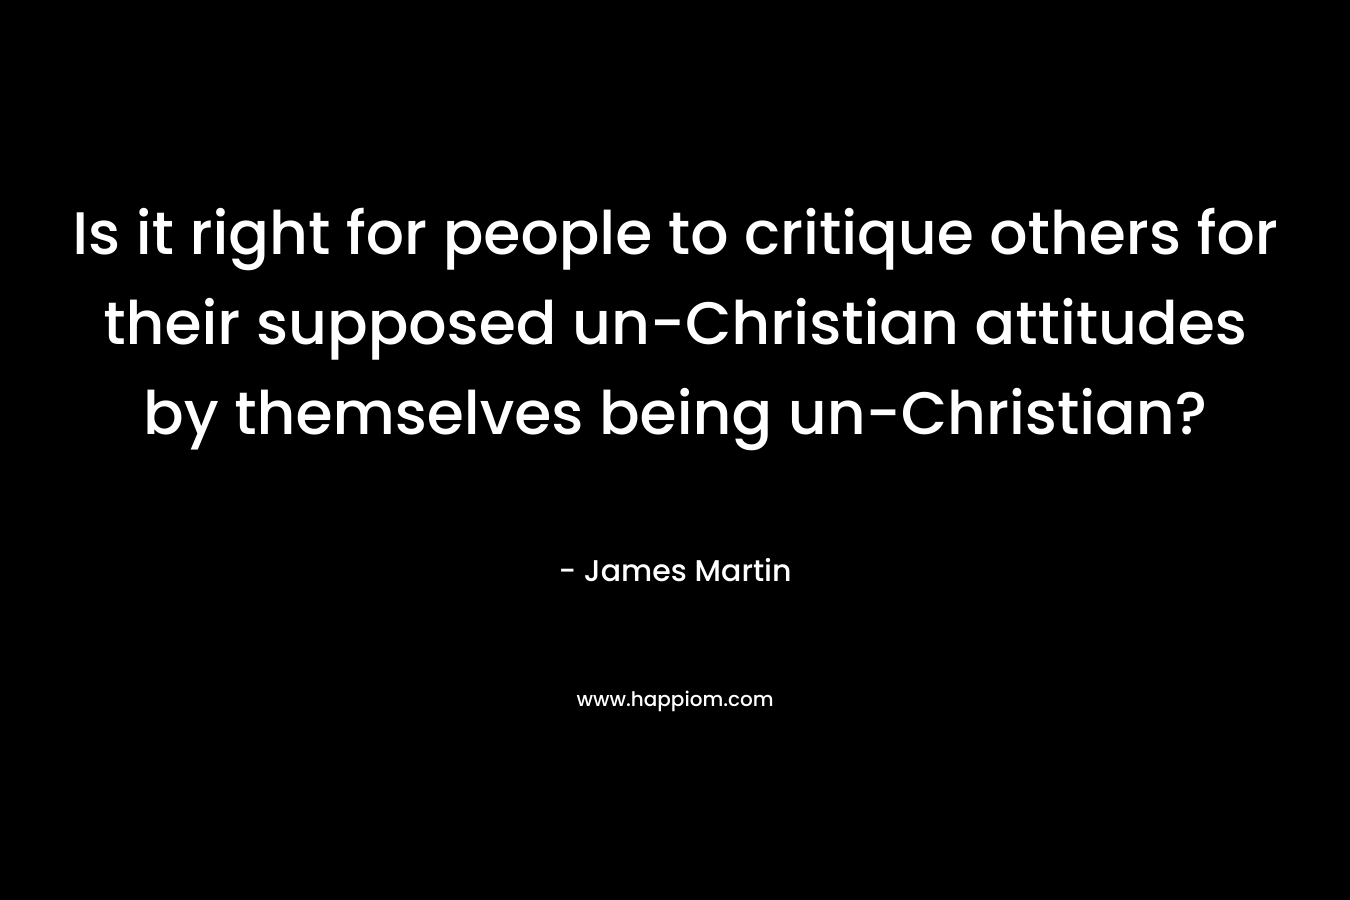 Is it right for people to critique others for their supposed un-Christian attitudes by themselves being un-Christian?